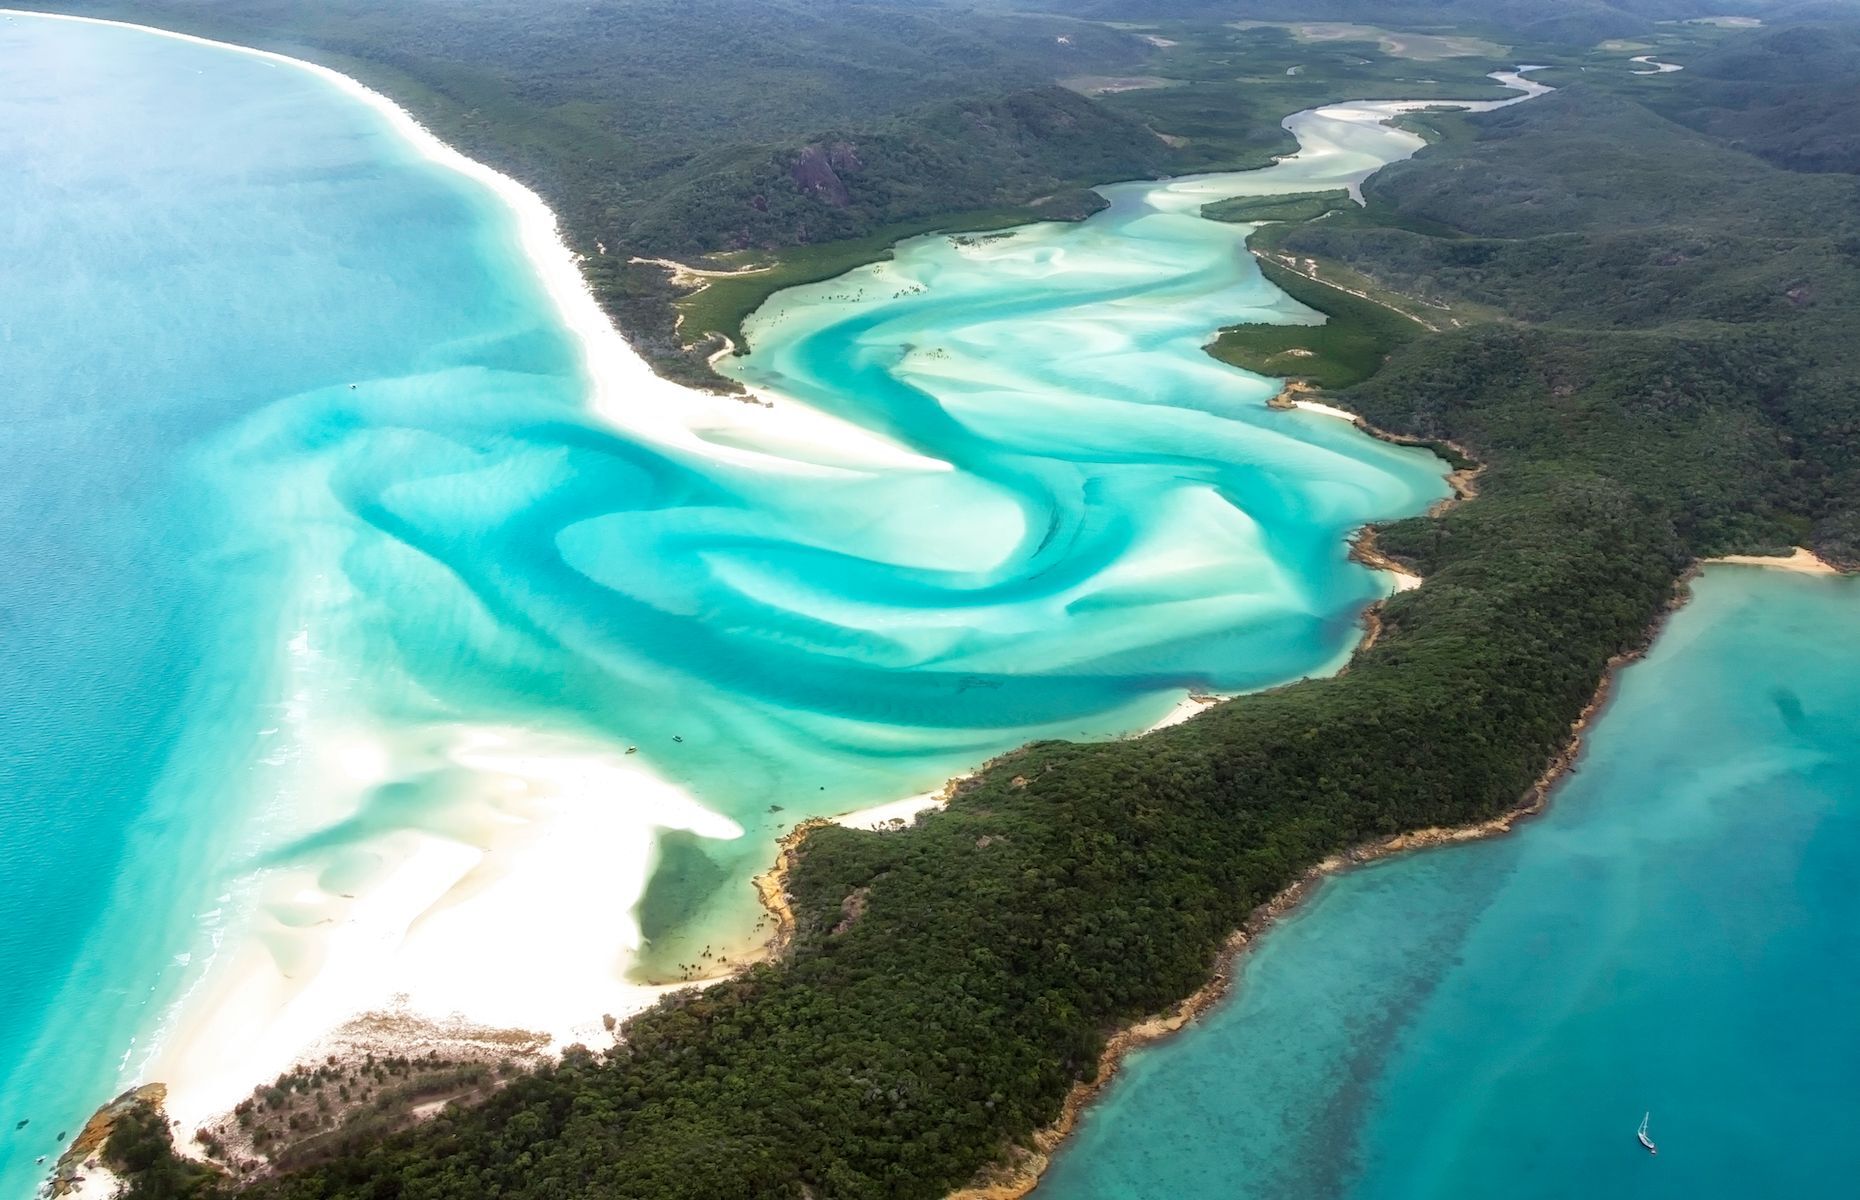 <p>Located in Australia’s Whitsunday archipelago, <a href="https://www.hamiltonisland.com.au/en" class="CMY_Link CMY_Valid" rel="noreferrer noopener">Hamilton</a> is a tropical paradise famous for its aquamarine waters and white sandy beaches. Visitors can indulge in a multitude of water activities, such as diving at the Great Barrier Reef and swimming in Hill Inlet’s natural pools. Meanwhile, hikers can explore the island’s interior and enjoy breathtaking panoramas from Passage Peak and other lookouts.</p>